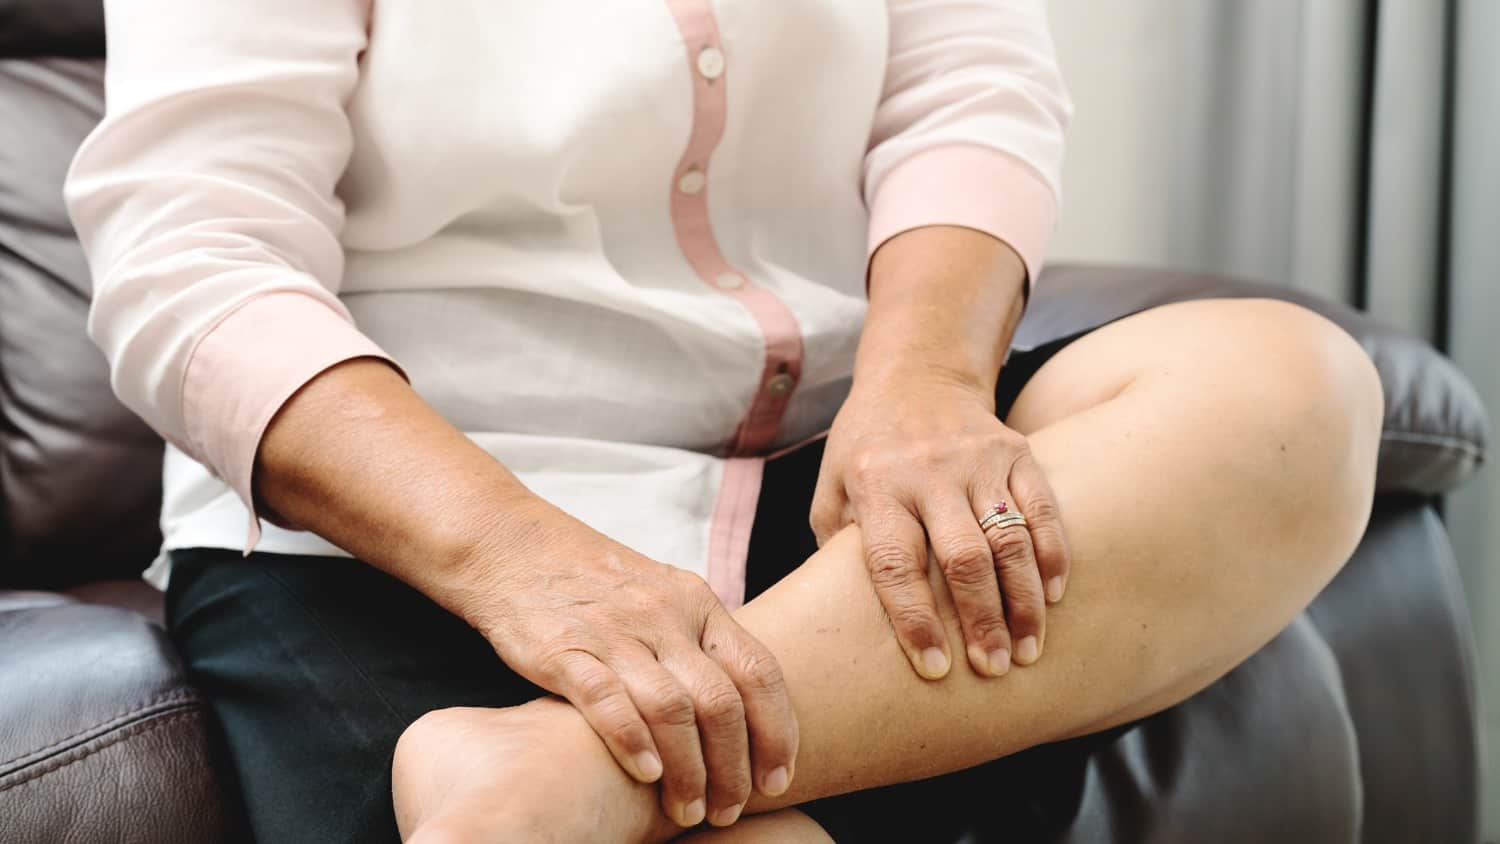 https://cdn.sixtyandme.com/wp-content/uploads/2020/12/Sixty-and-Me_Easy-2-Minute-Knee-Massage-to-Relieve-Pain-in-the-Back-of-the-Knee.jpg